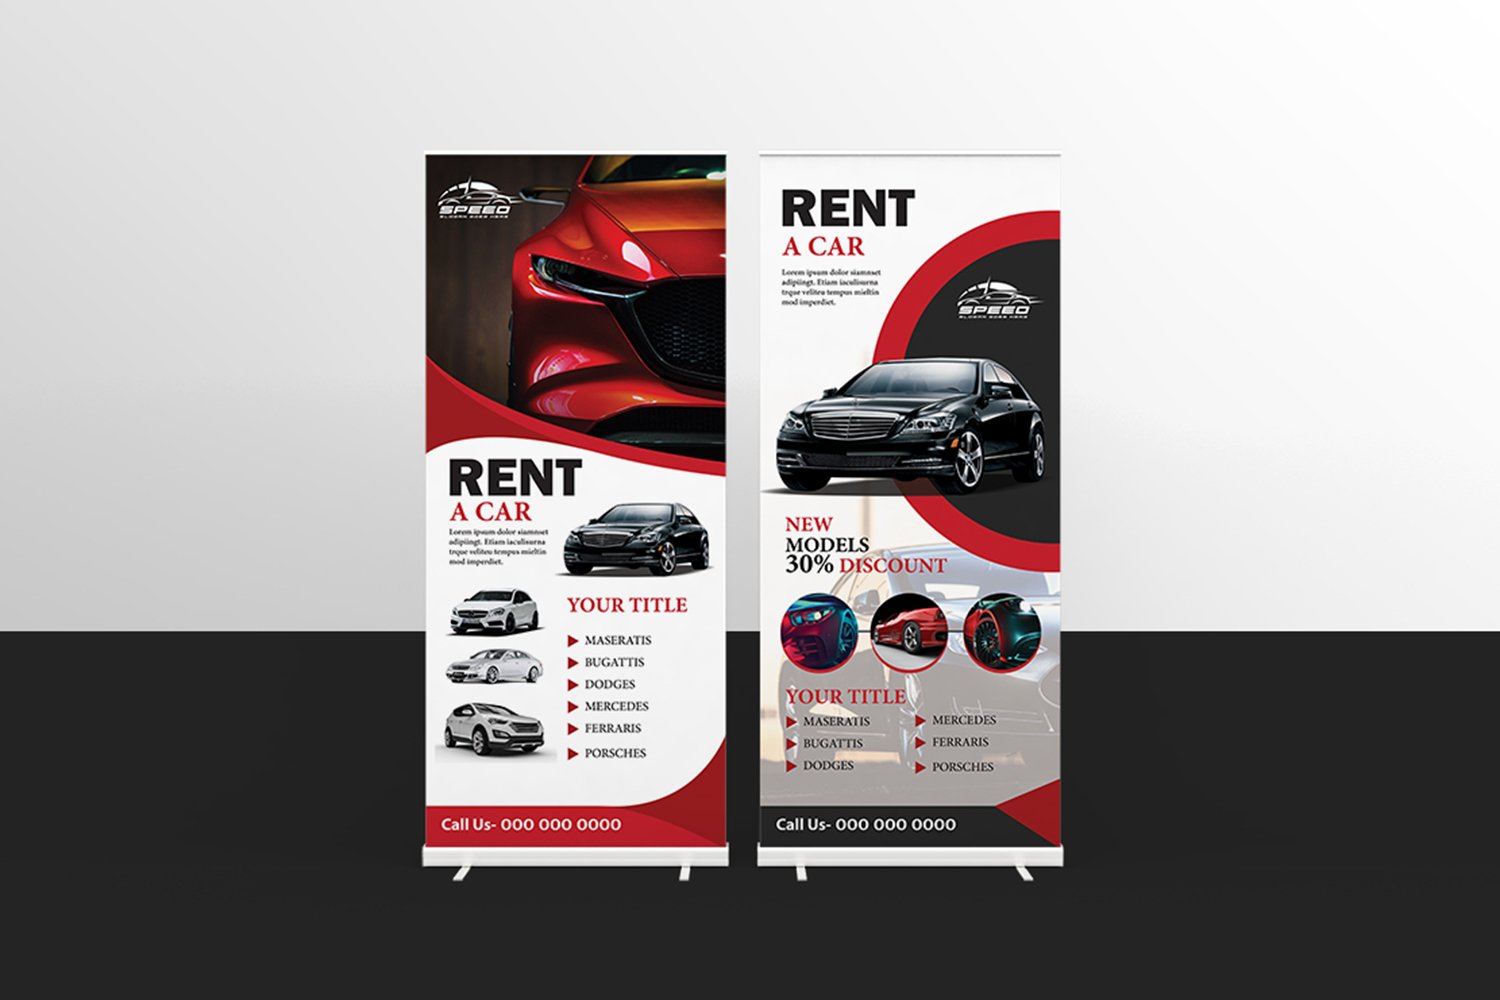 Ren A Car Roll Up Banner Corporate Identity Template